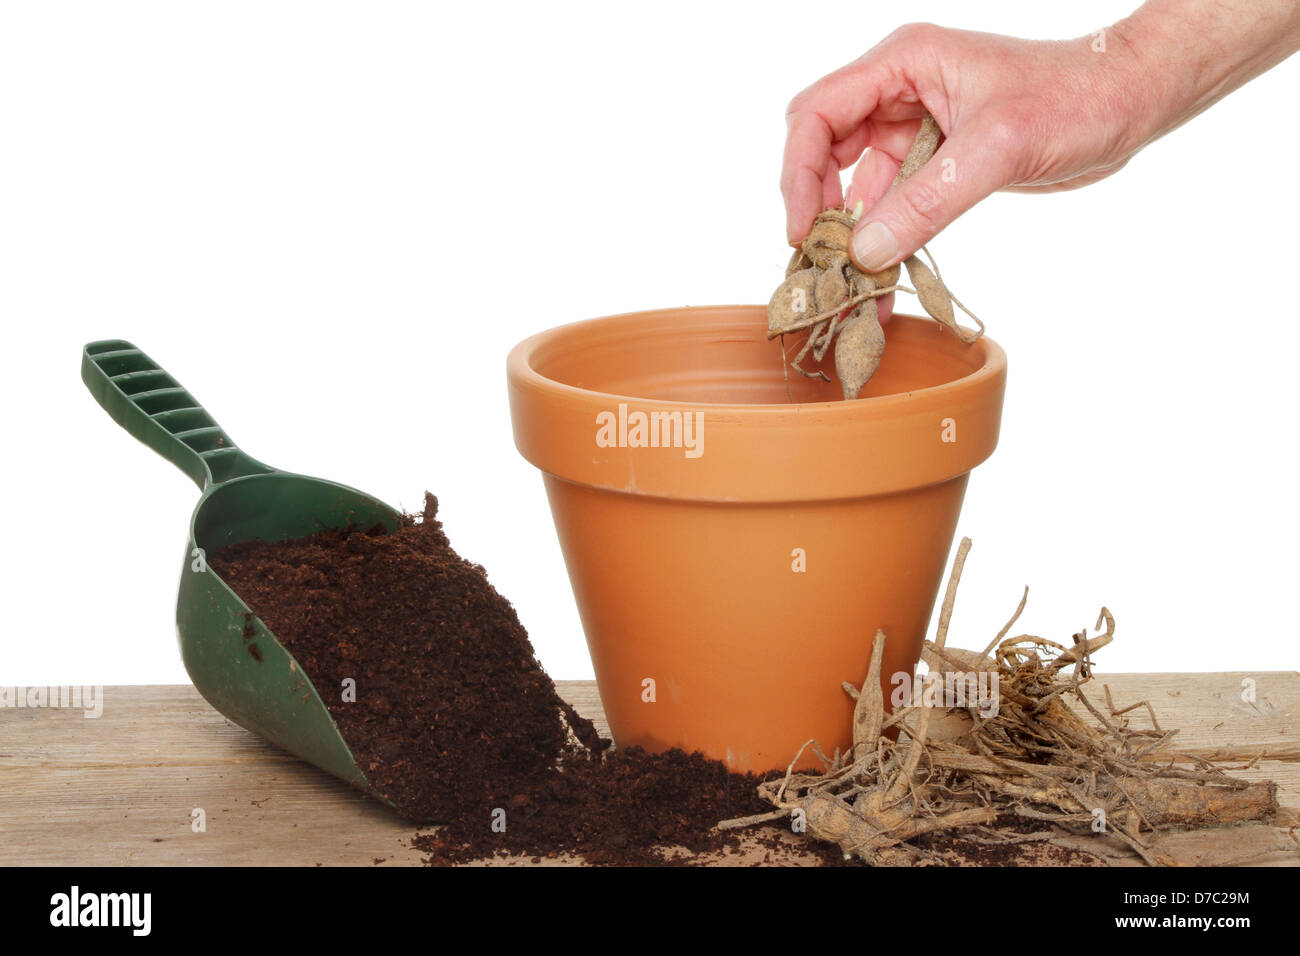 Hand planting a dahlia tuber into a terracotta pot on a potting bench Stock Photo